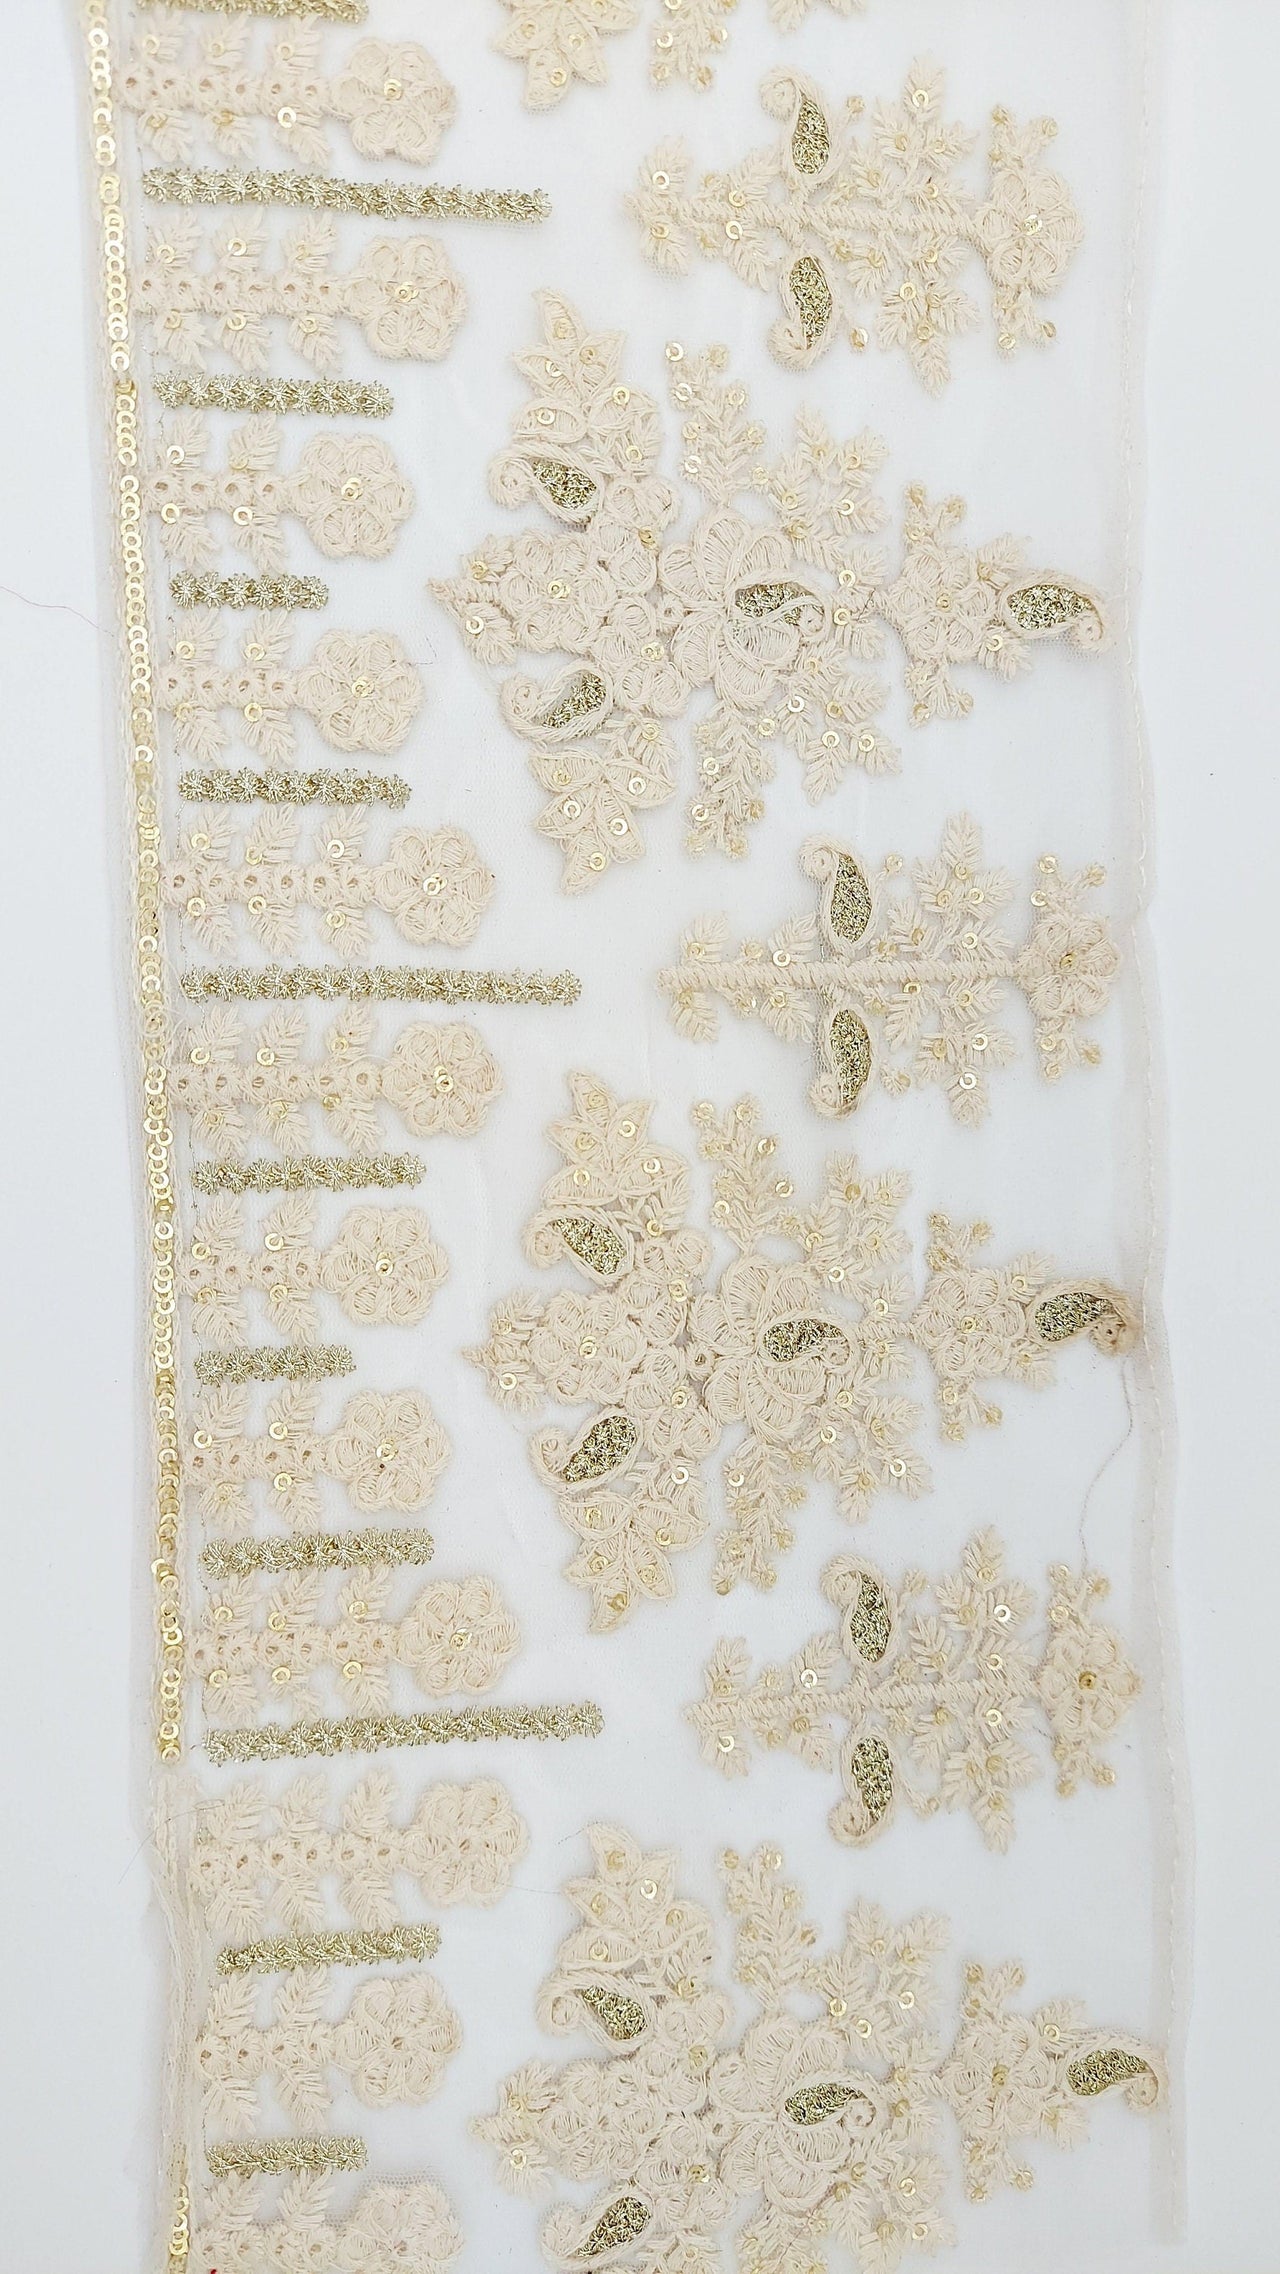 9 Yards Off White Net Lace Trim Floral Embroidery and Gold Sequins, Floral Sari Border, Decorative Trim